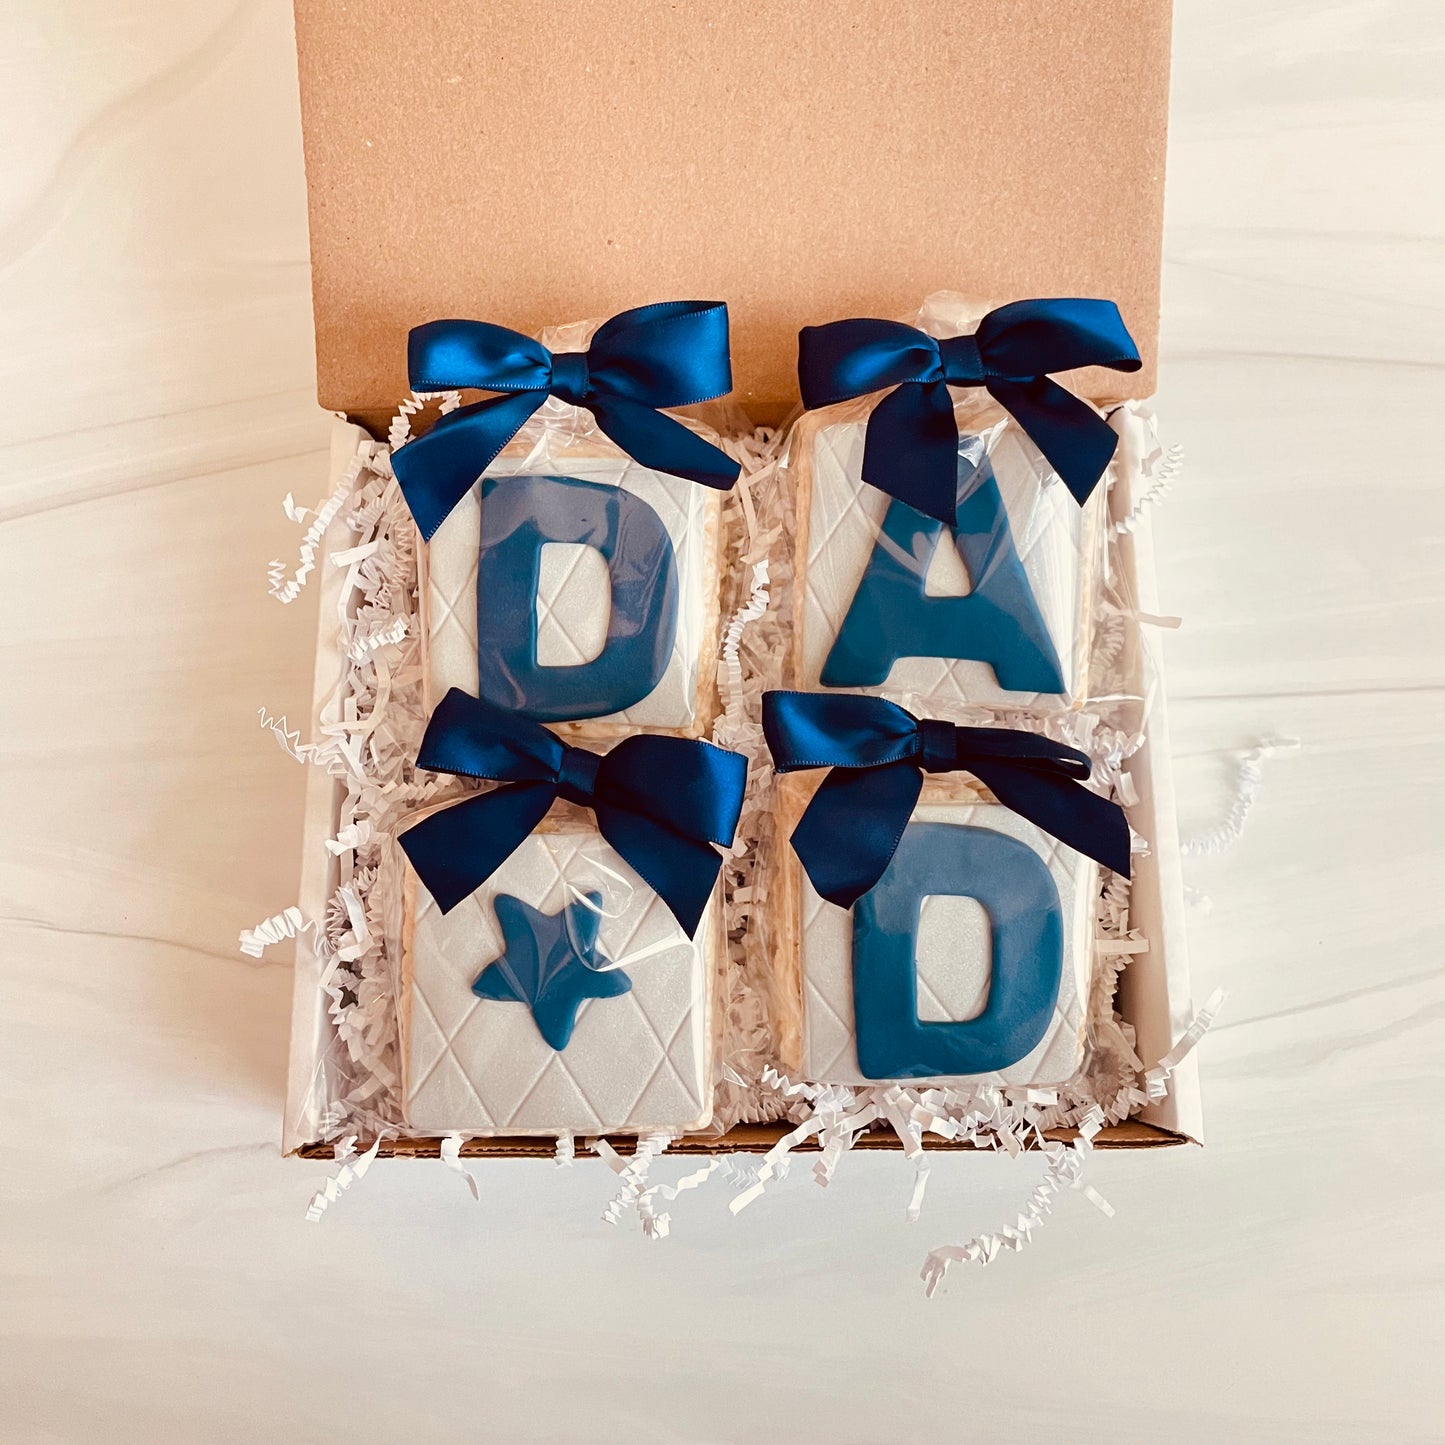 Father's Day "DAD" Rice Crispie Treats